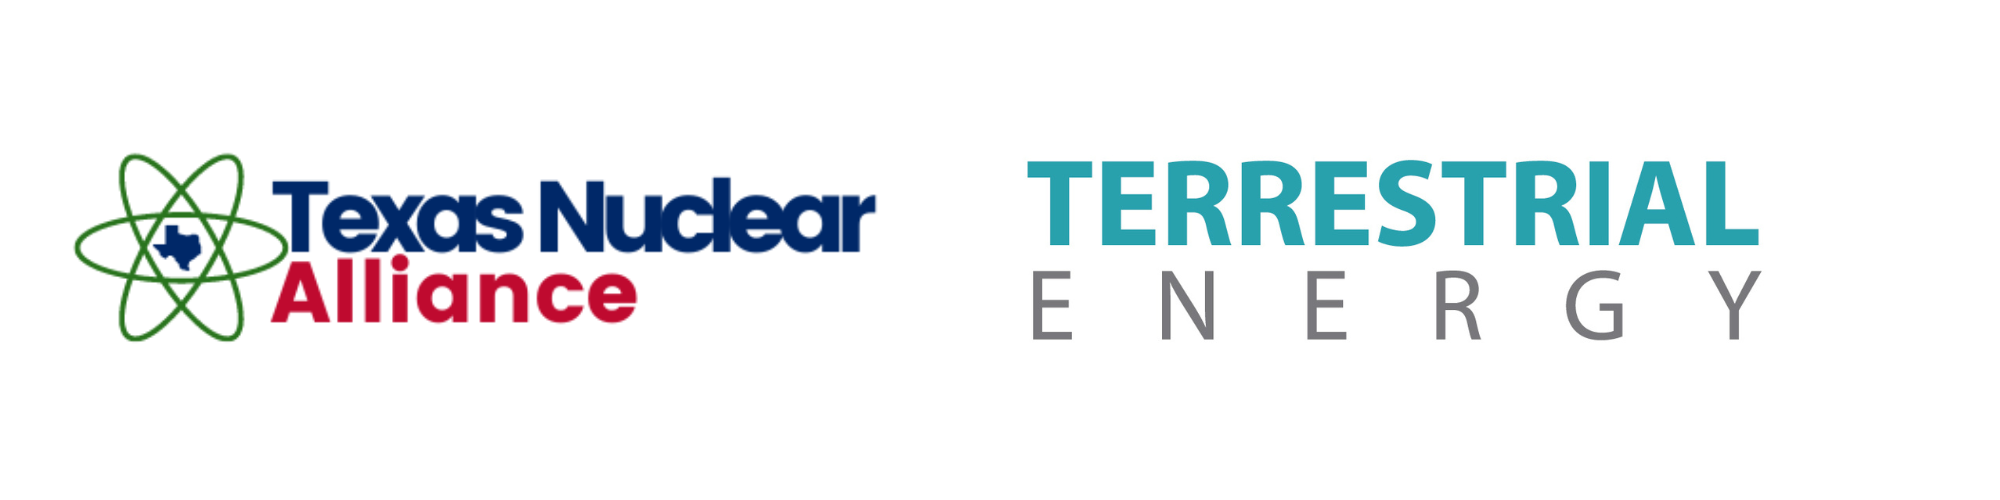 Terrestrial Energy Joins Texas Nuclear Alliance as a Founding Member